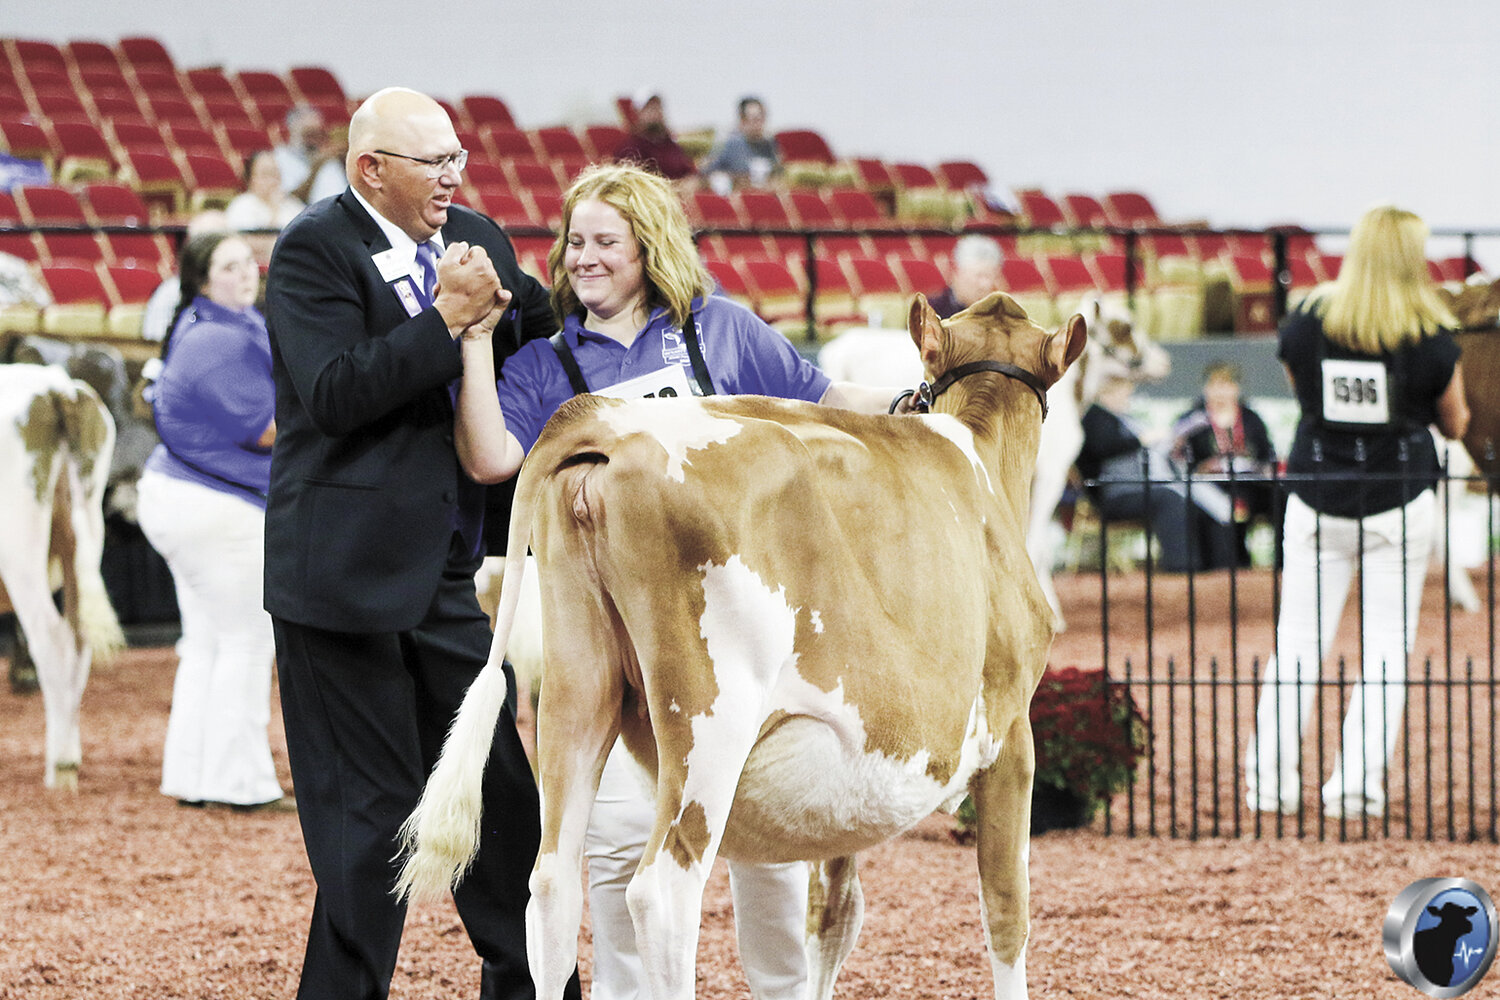 Judge Kevin Hartmann congratulates Haley Beukema as he names her Guernsey winter calf, CB VG Jack Dont Forget Me-ETV, the junior champion of the International Guernsey Show Oct. 2 at World Dairy Expo in Madison, Wisconsin. The calf was also named junior champion in the youth division.